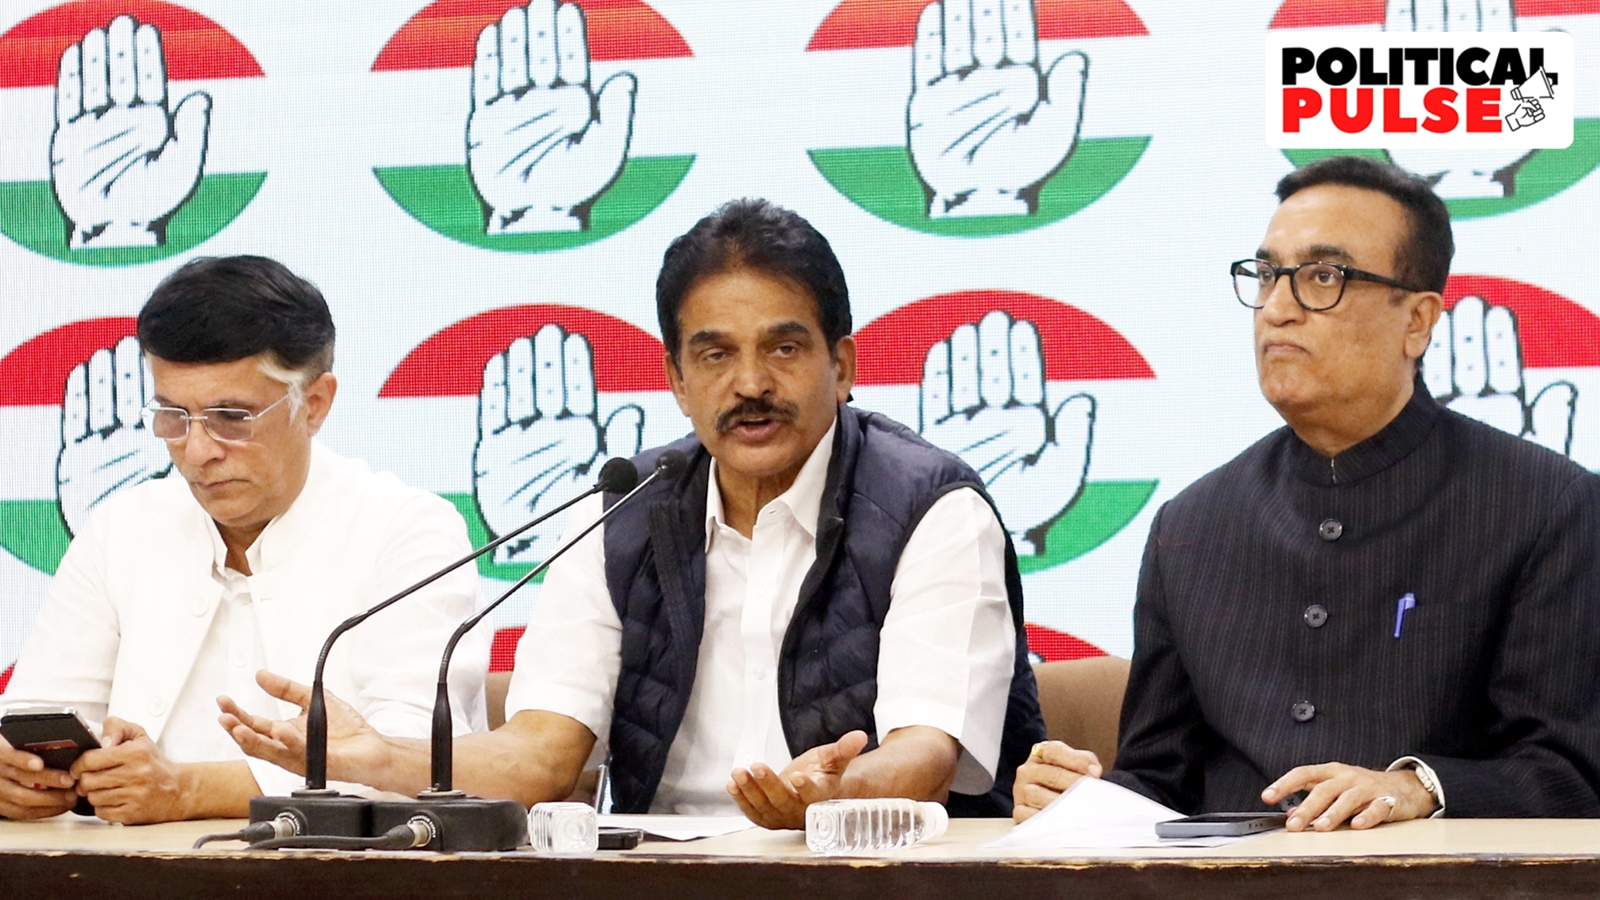 Congress leaders K C Venugopal, Ajay Maken, and Pawan Khera address a press conference at AICC Headquarters, announcing the first list of 39 candidates from the party for the upcoming Lok Sabha elections